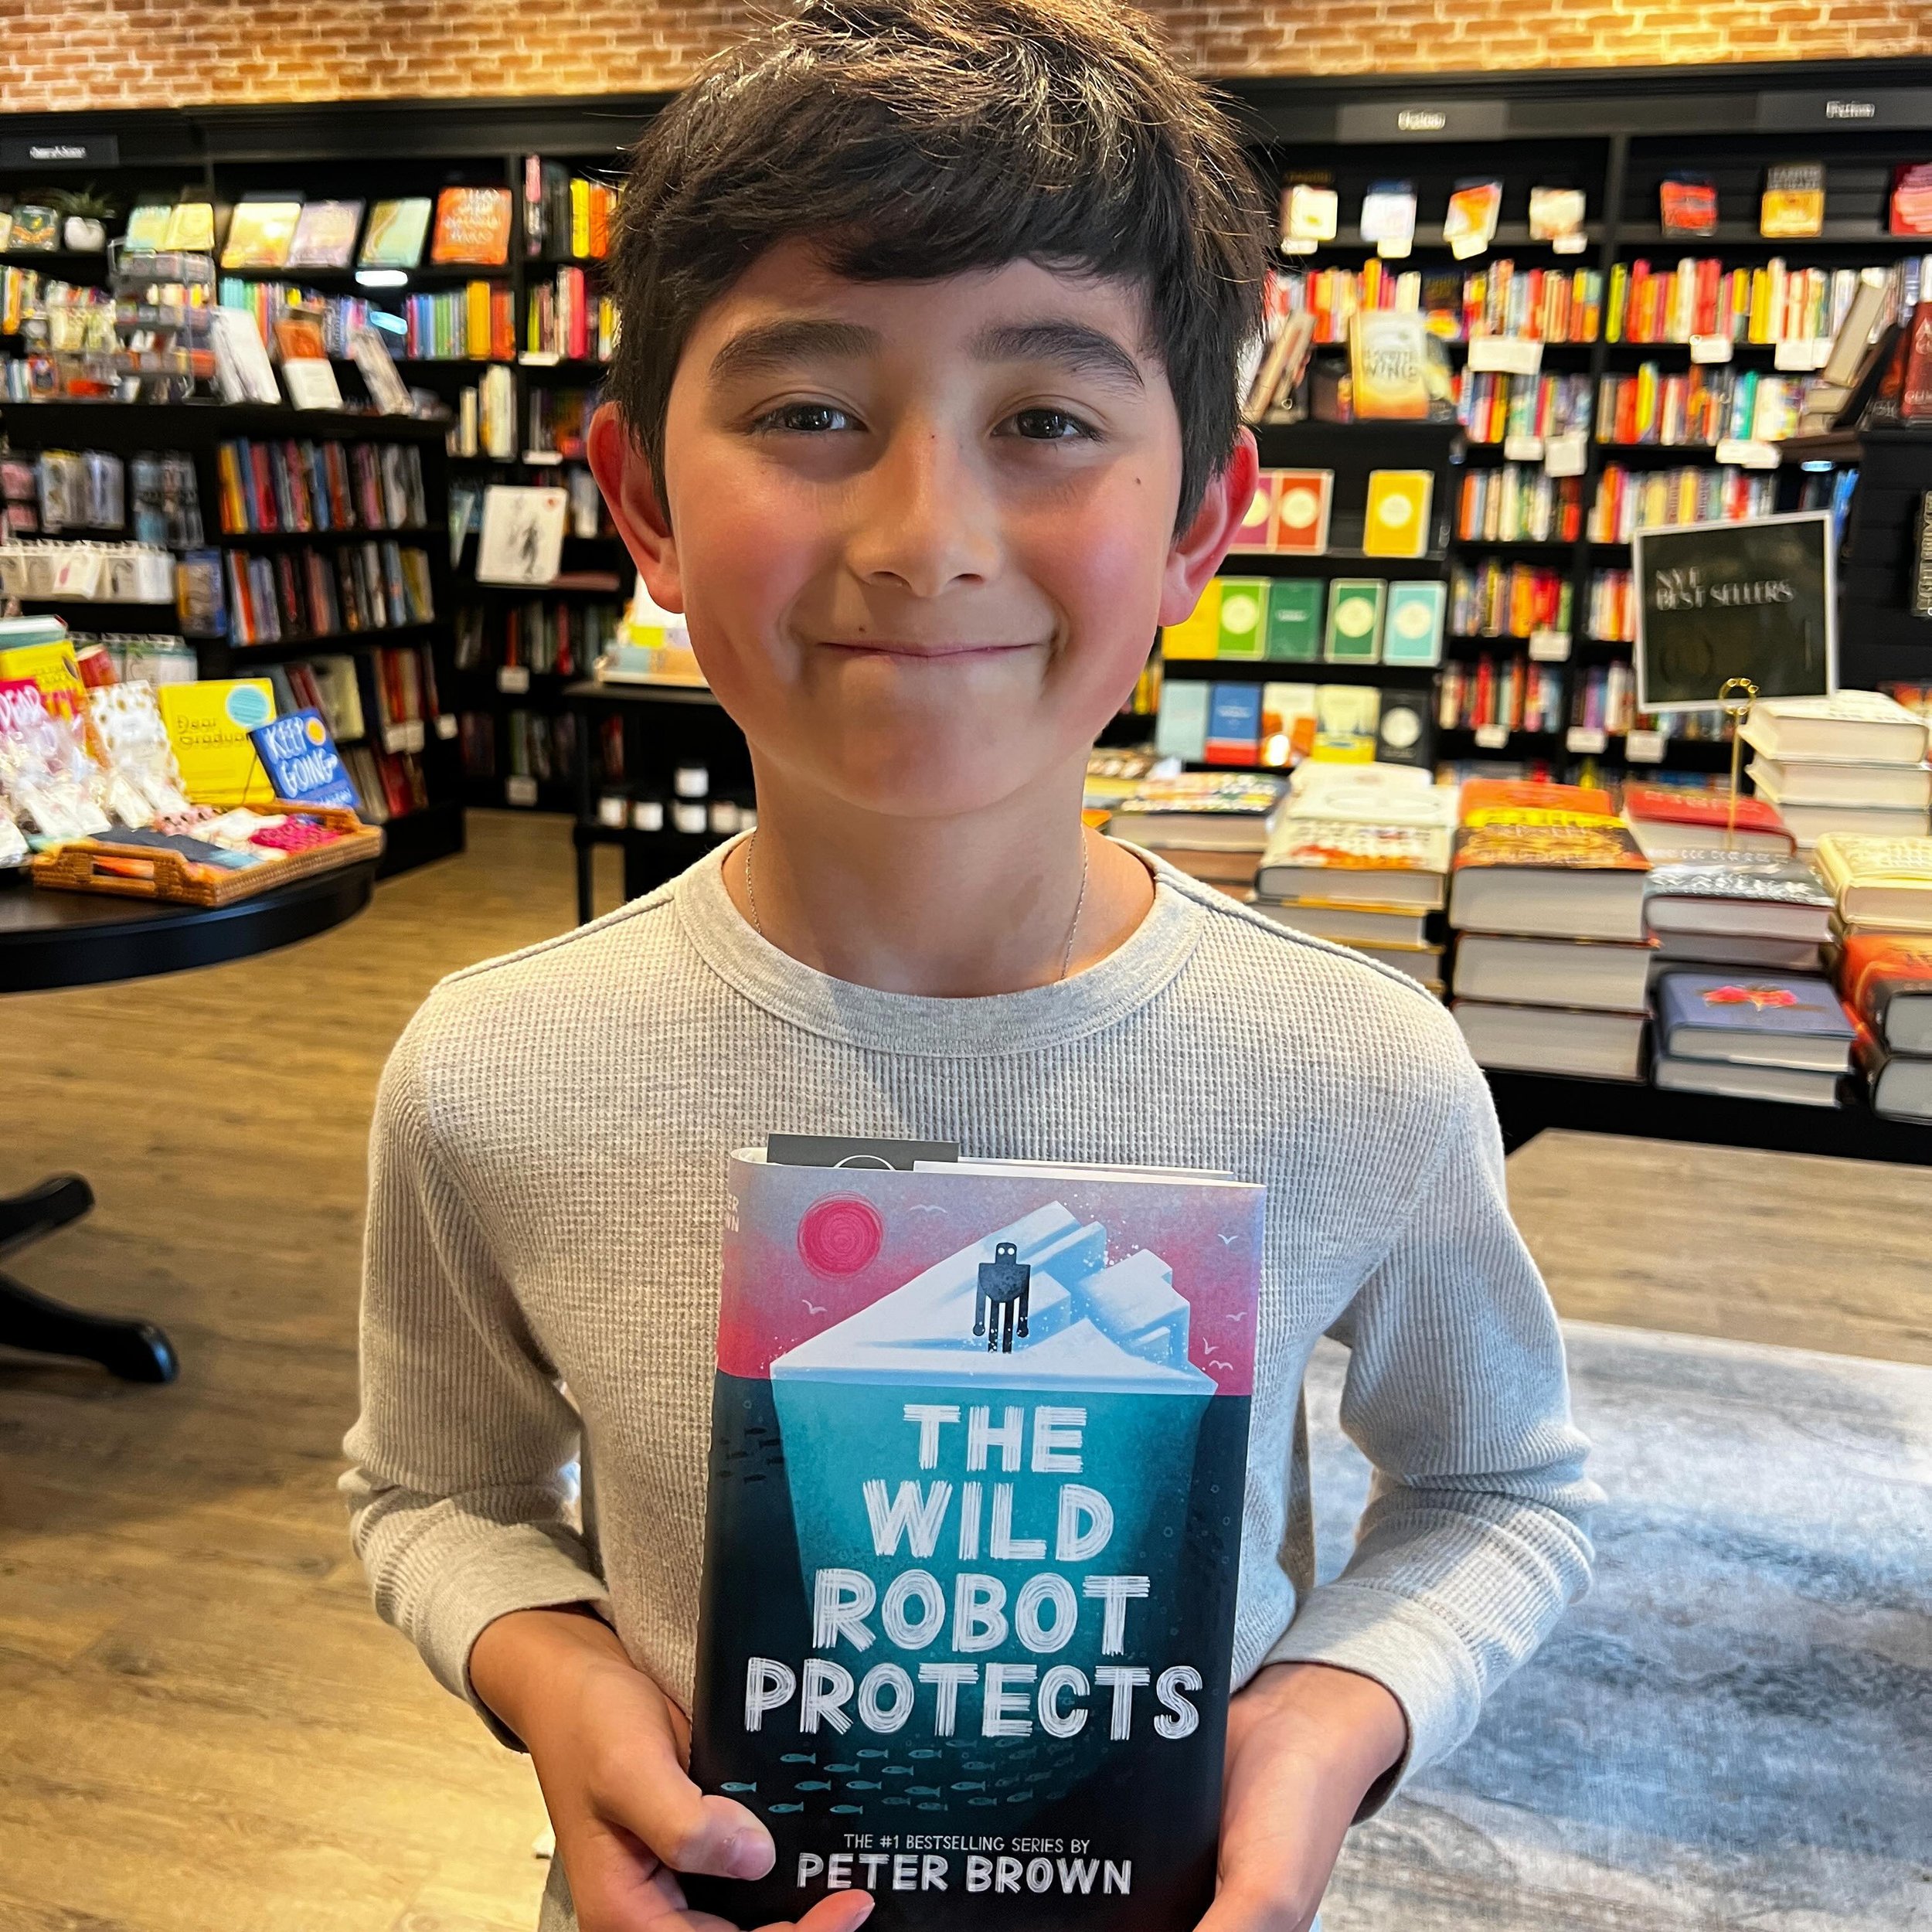 Happy customer! Nine-year-old Ashton had one mission when he walked into @hummingbirdbookstore today: to get the new installment of the Wild Robot series by Peter Brown (@peterbrownstudio). We&rsquo;re thrilled to say he left with a huge smile and hi